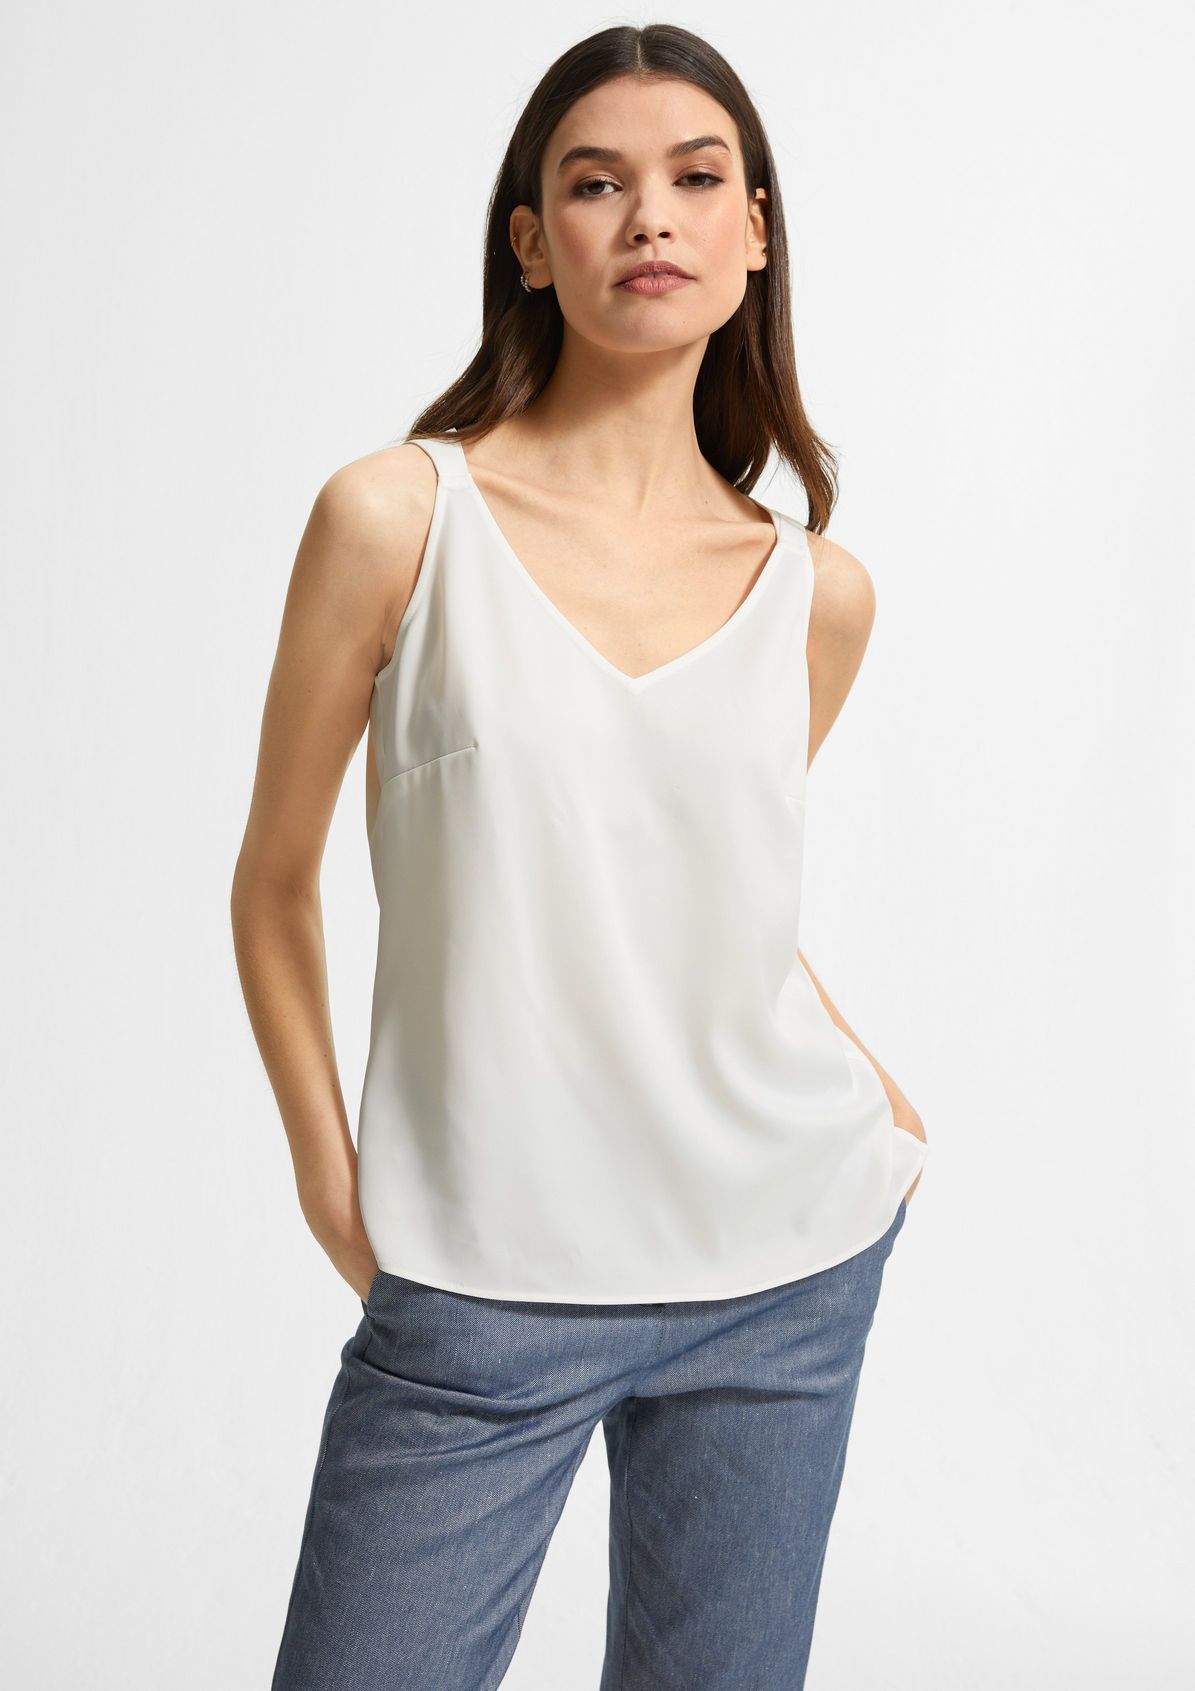 Satin top with a back neckline from comma